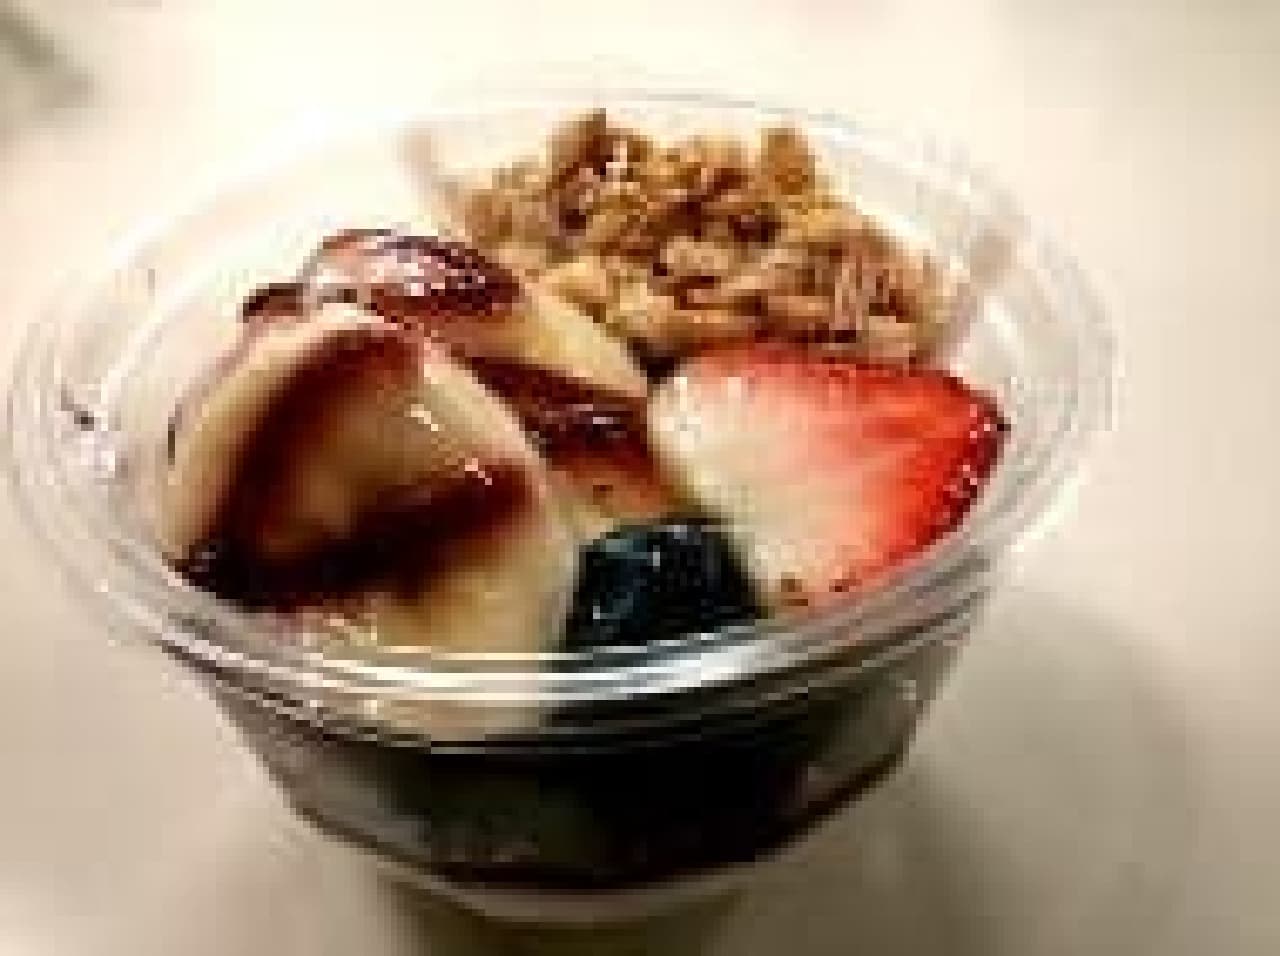 Is "Acai Bowl" also at a convenience store?